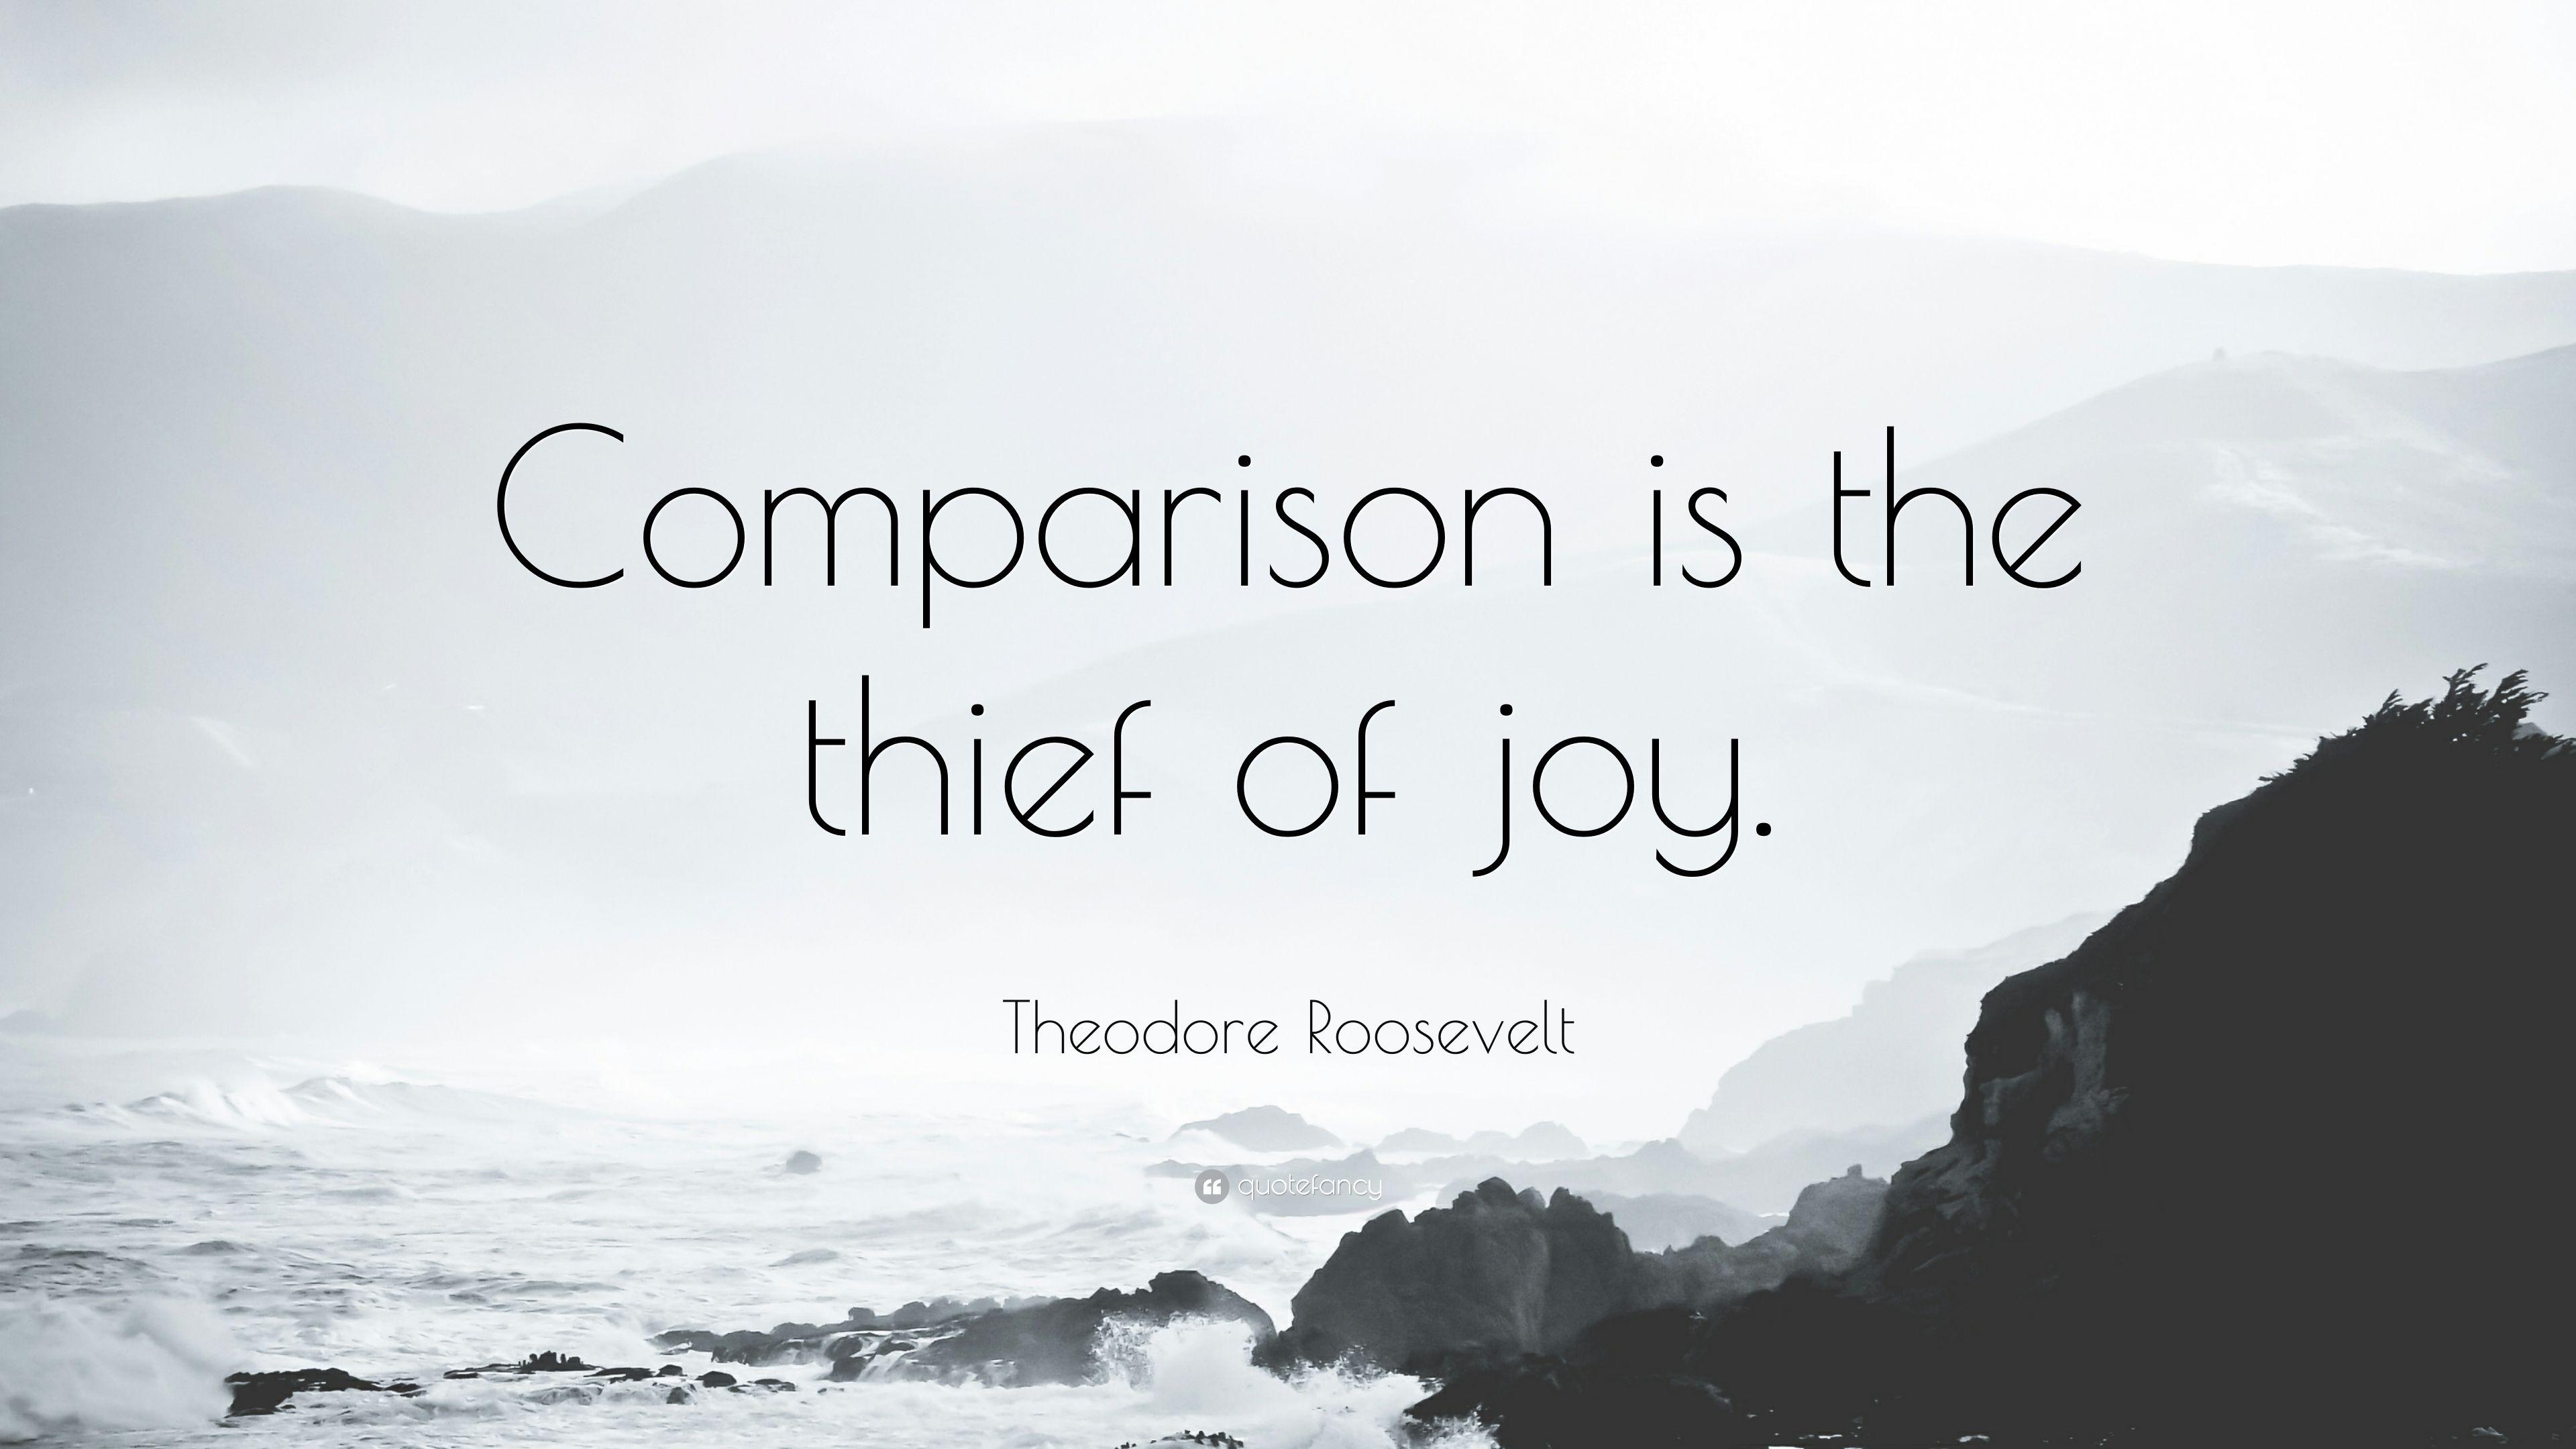 Theodore Roosevelt Quote: “Comparison is the thief of joy.” 17